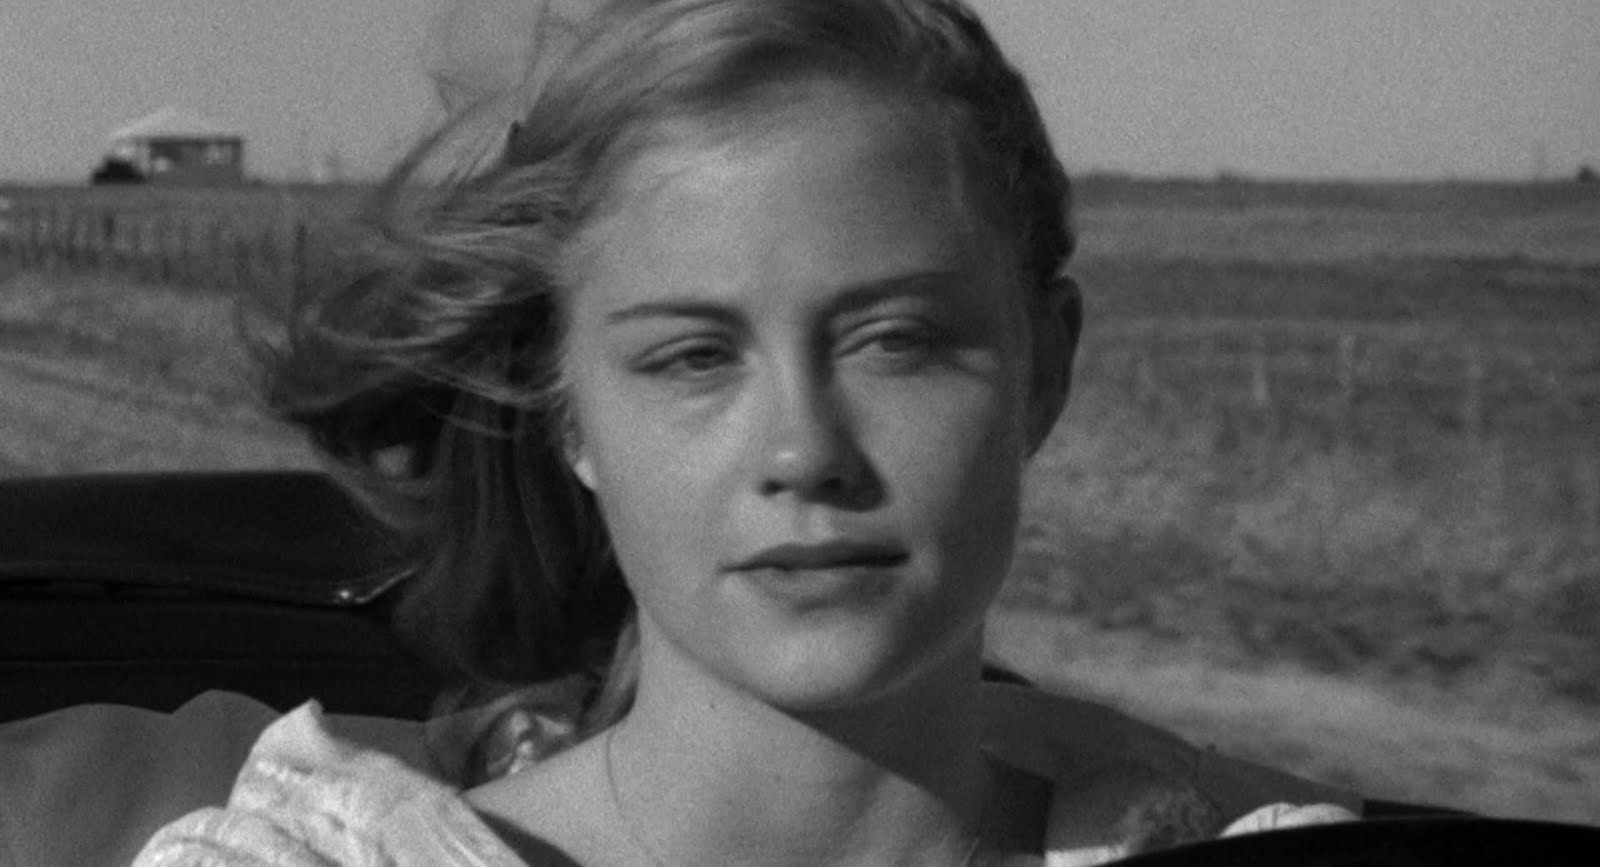 Happy Birthday to Cybill Shepherd, here in THE LAST PICTURE SHOW! 